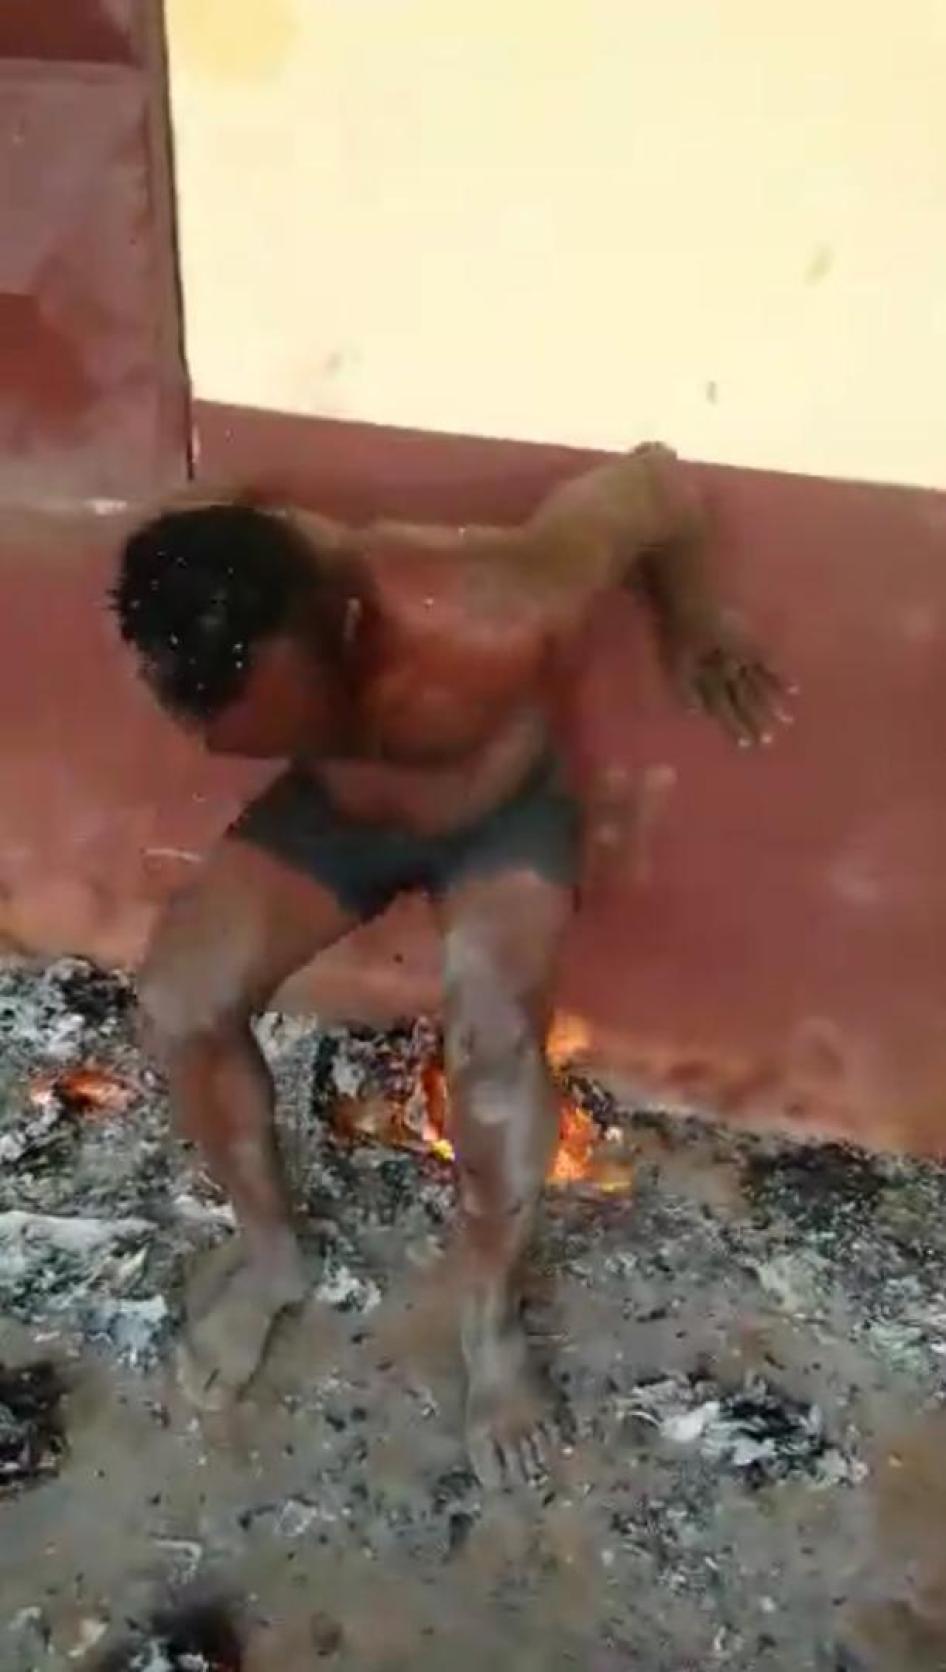 Cameroon: Video Shows Separatists Torturing Man | Human Rights Watch